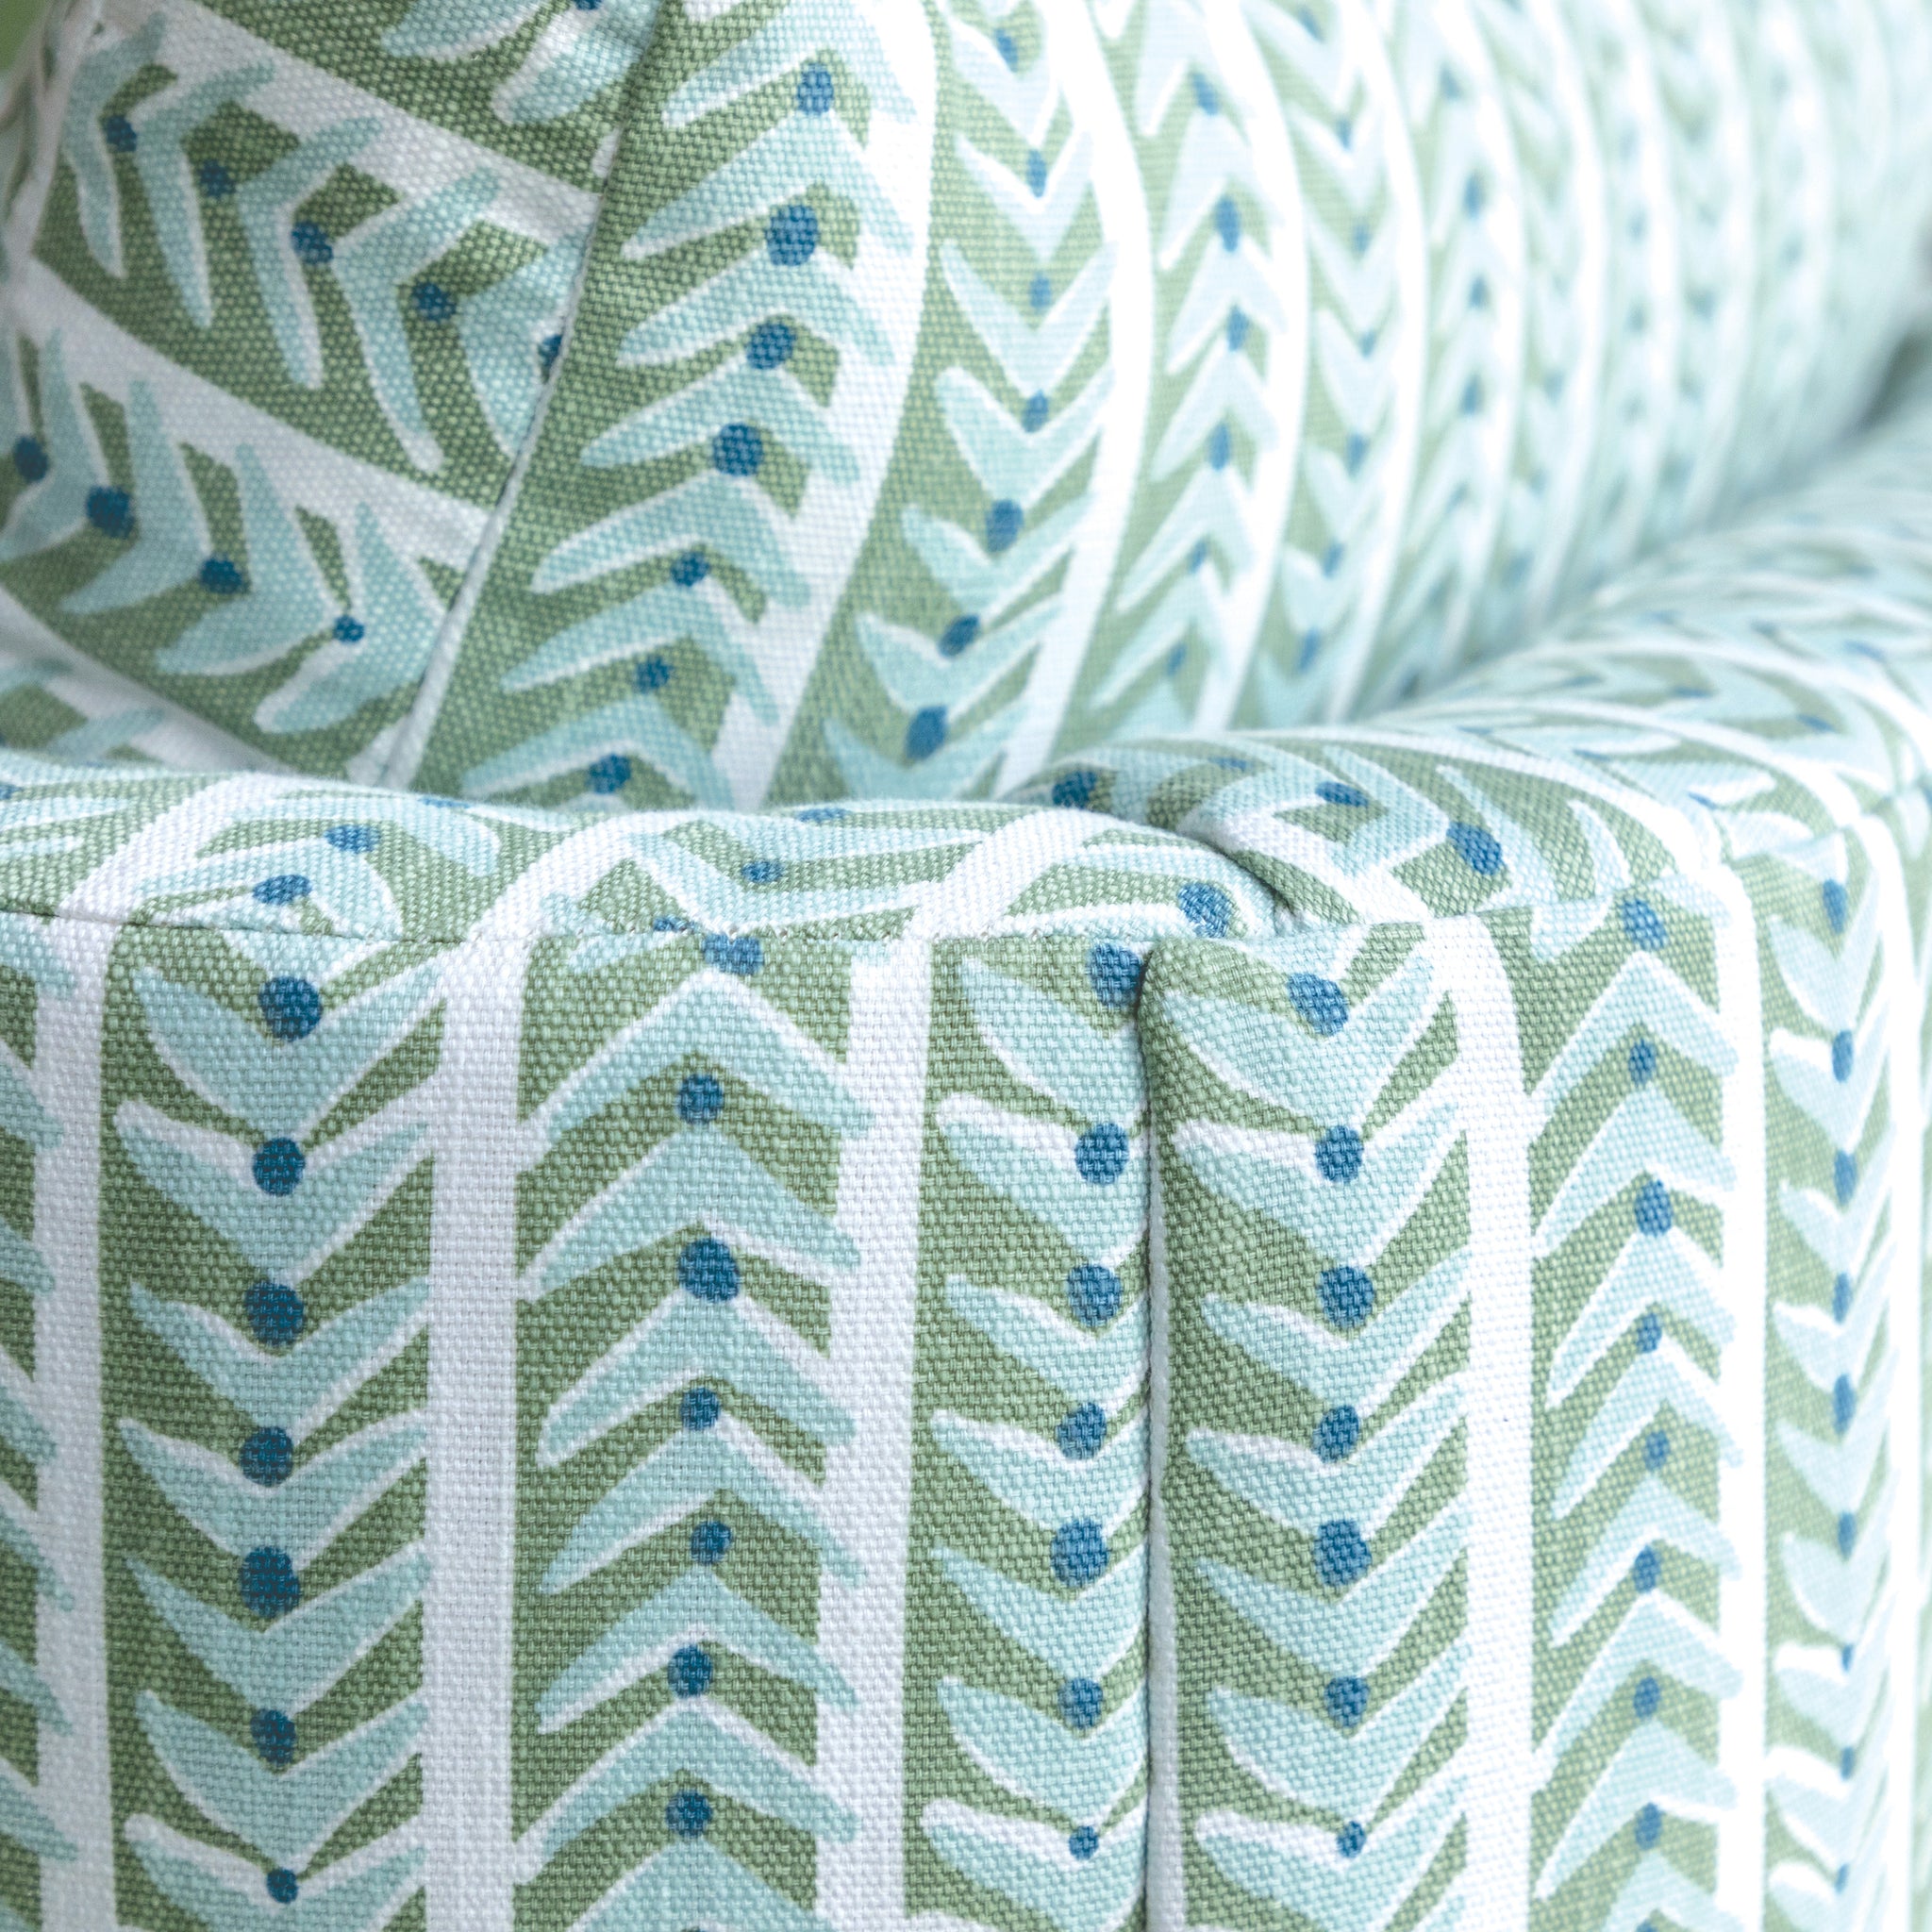 Maine Cottage Shelby Chair  | Upholstered Chairs | Maine Cottage® 